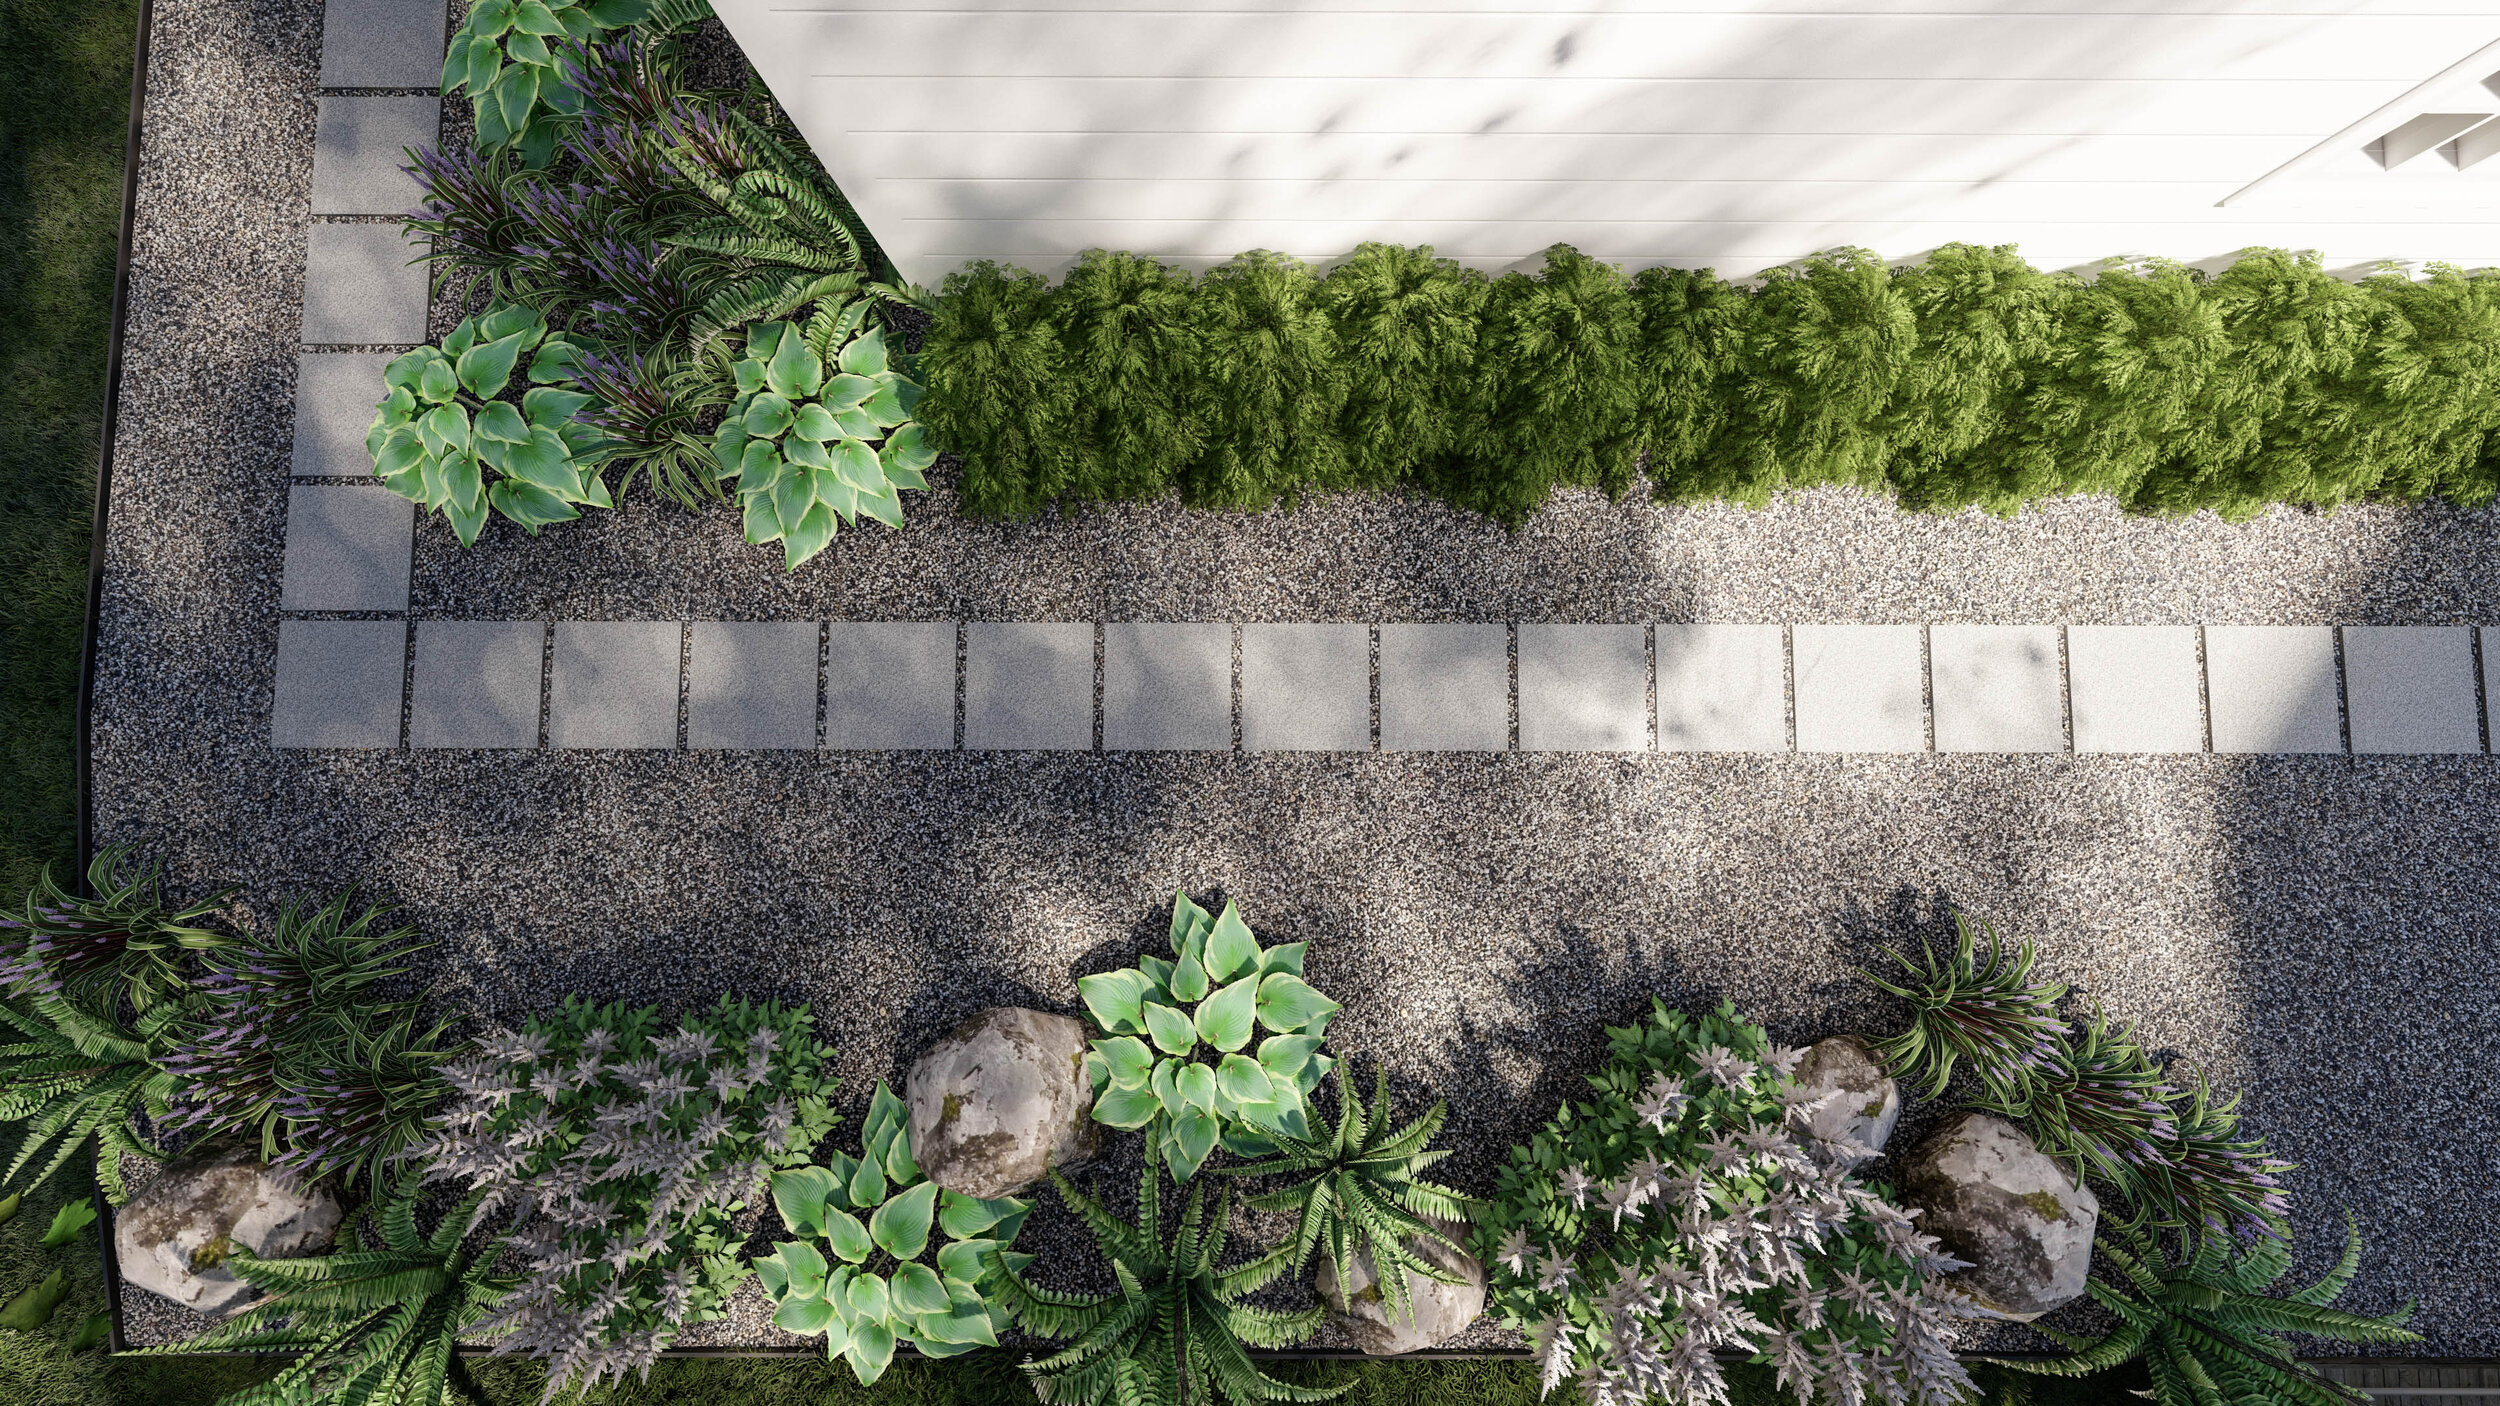 Overhead view of paver pathway with gravel and lush plantings